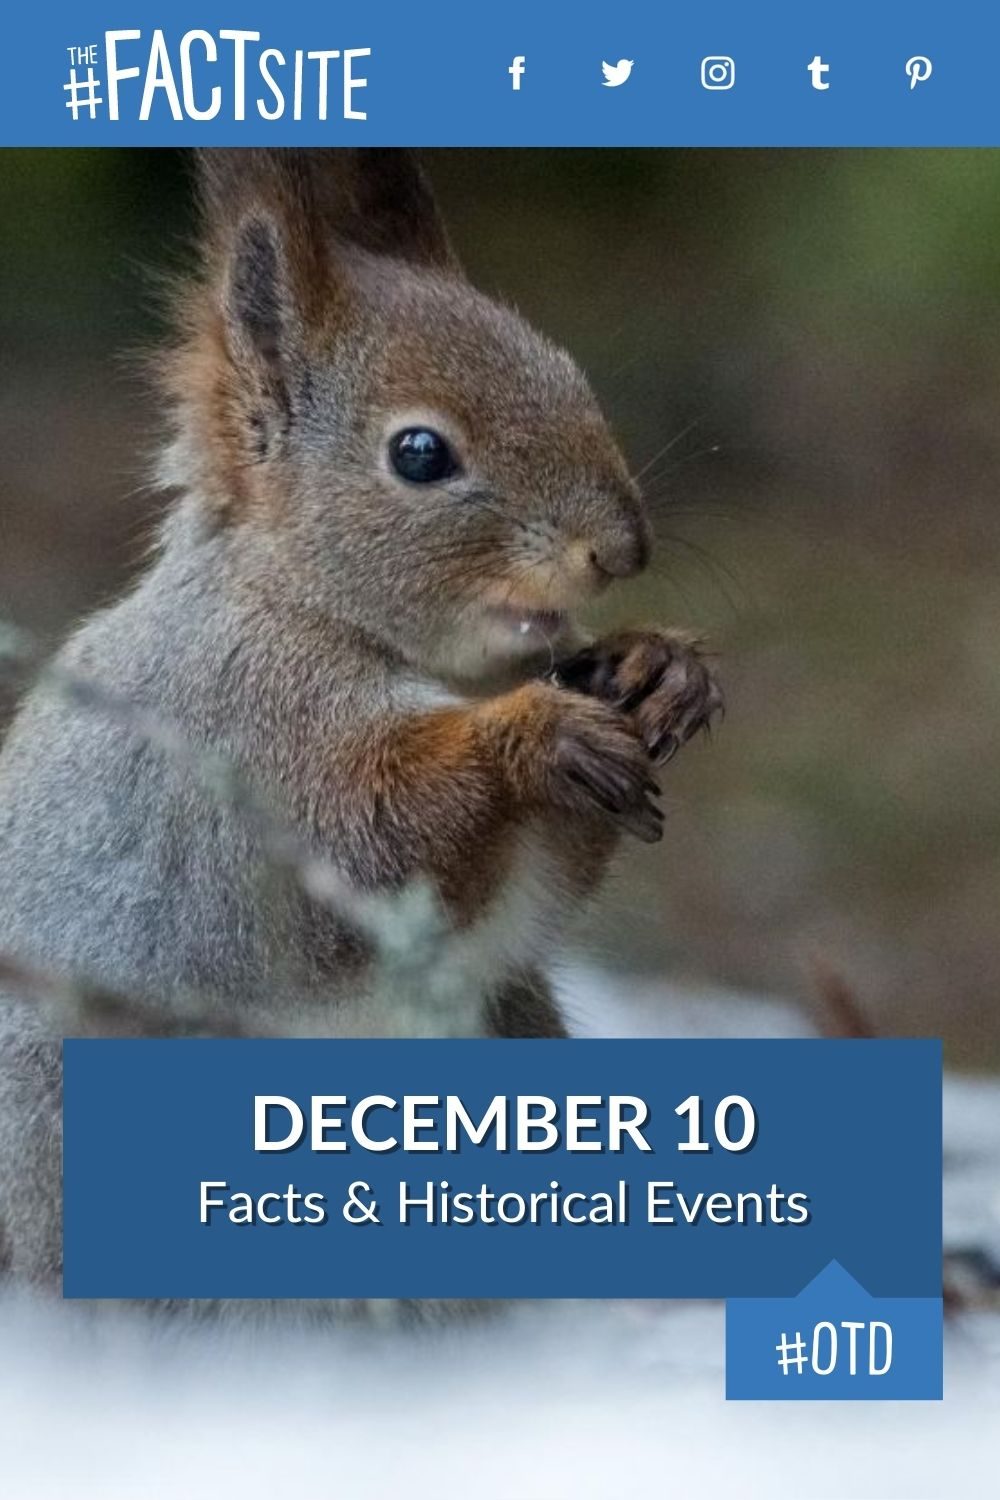 Facts & Historic Events That Happened on December 10